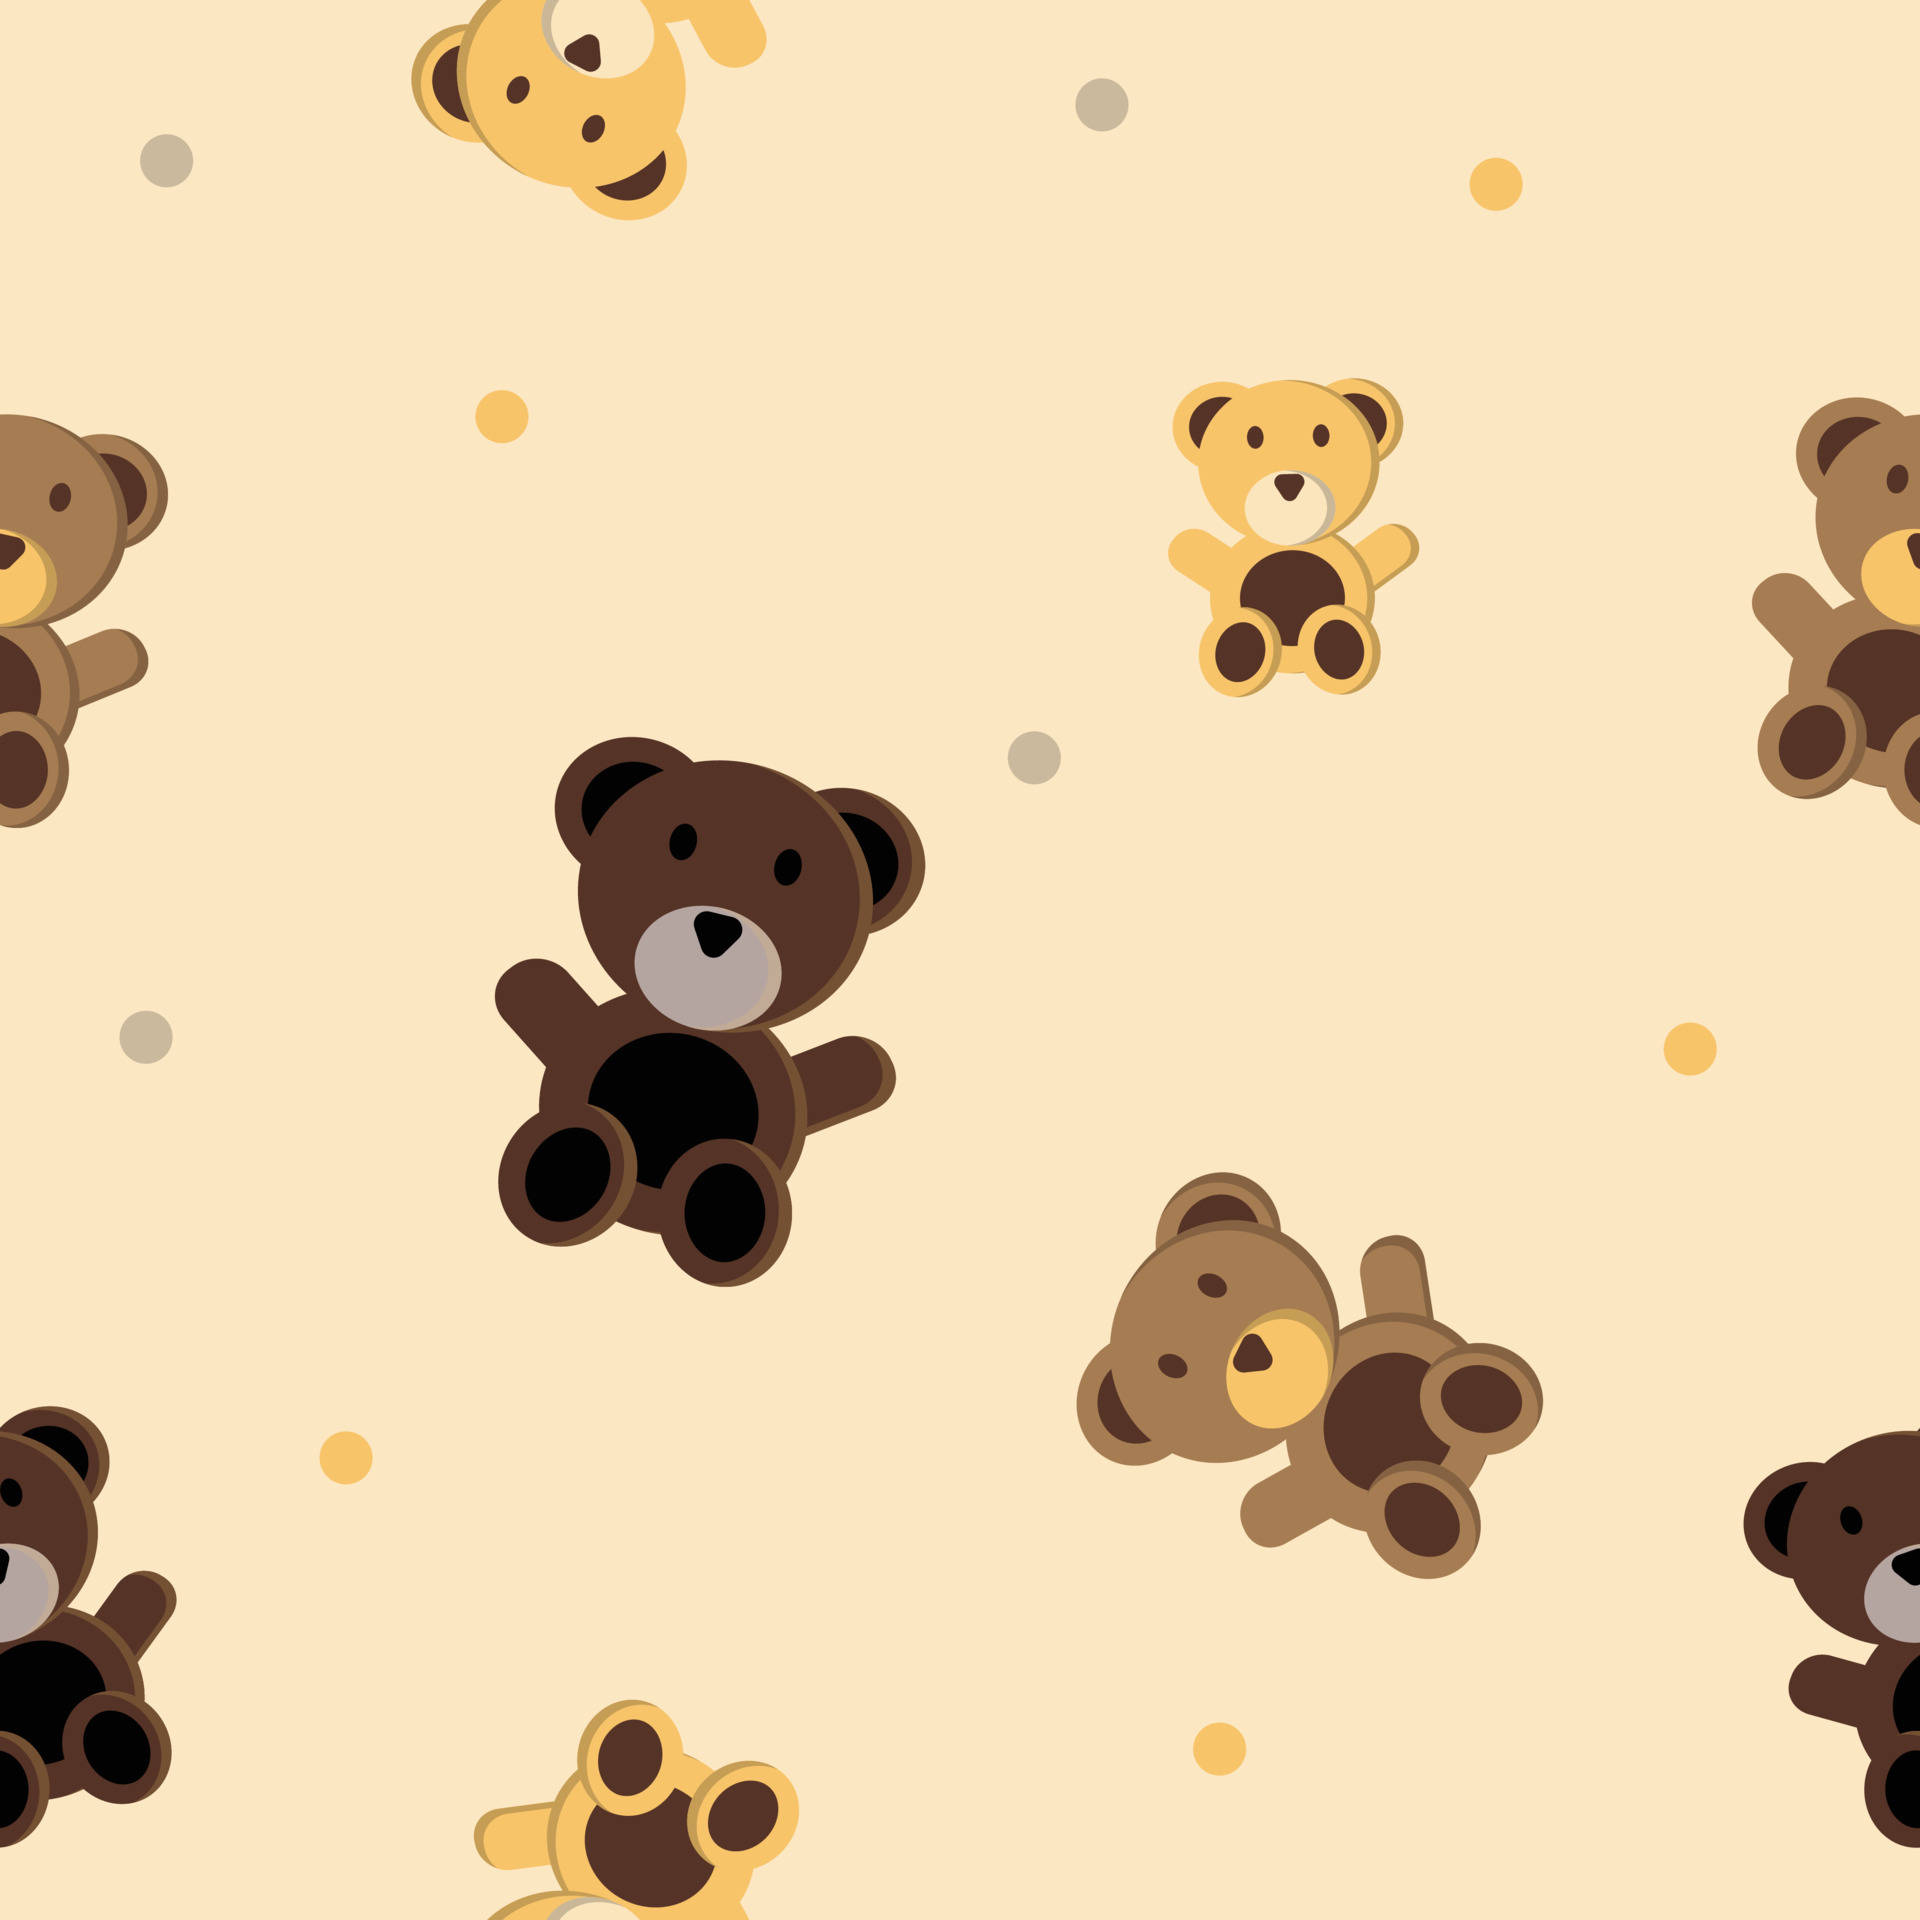 "This fuzzy, cute brown bear will melt your heart!" Wallpaper